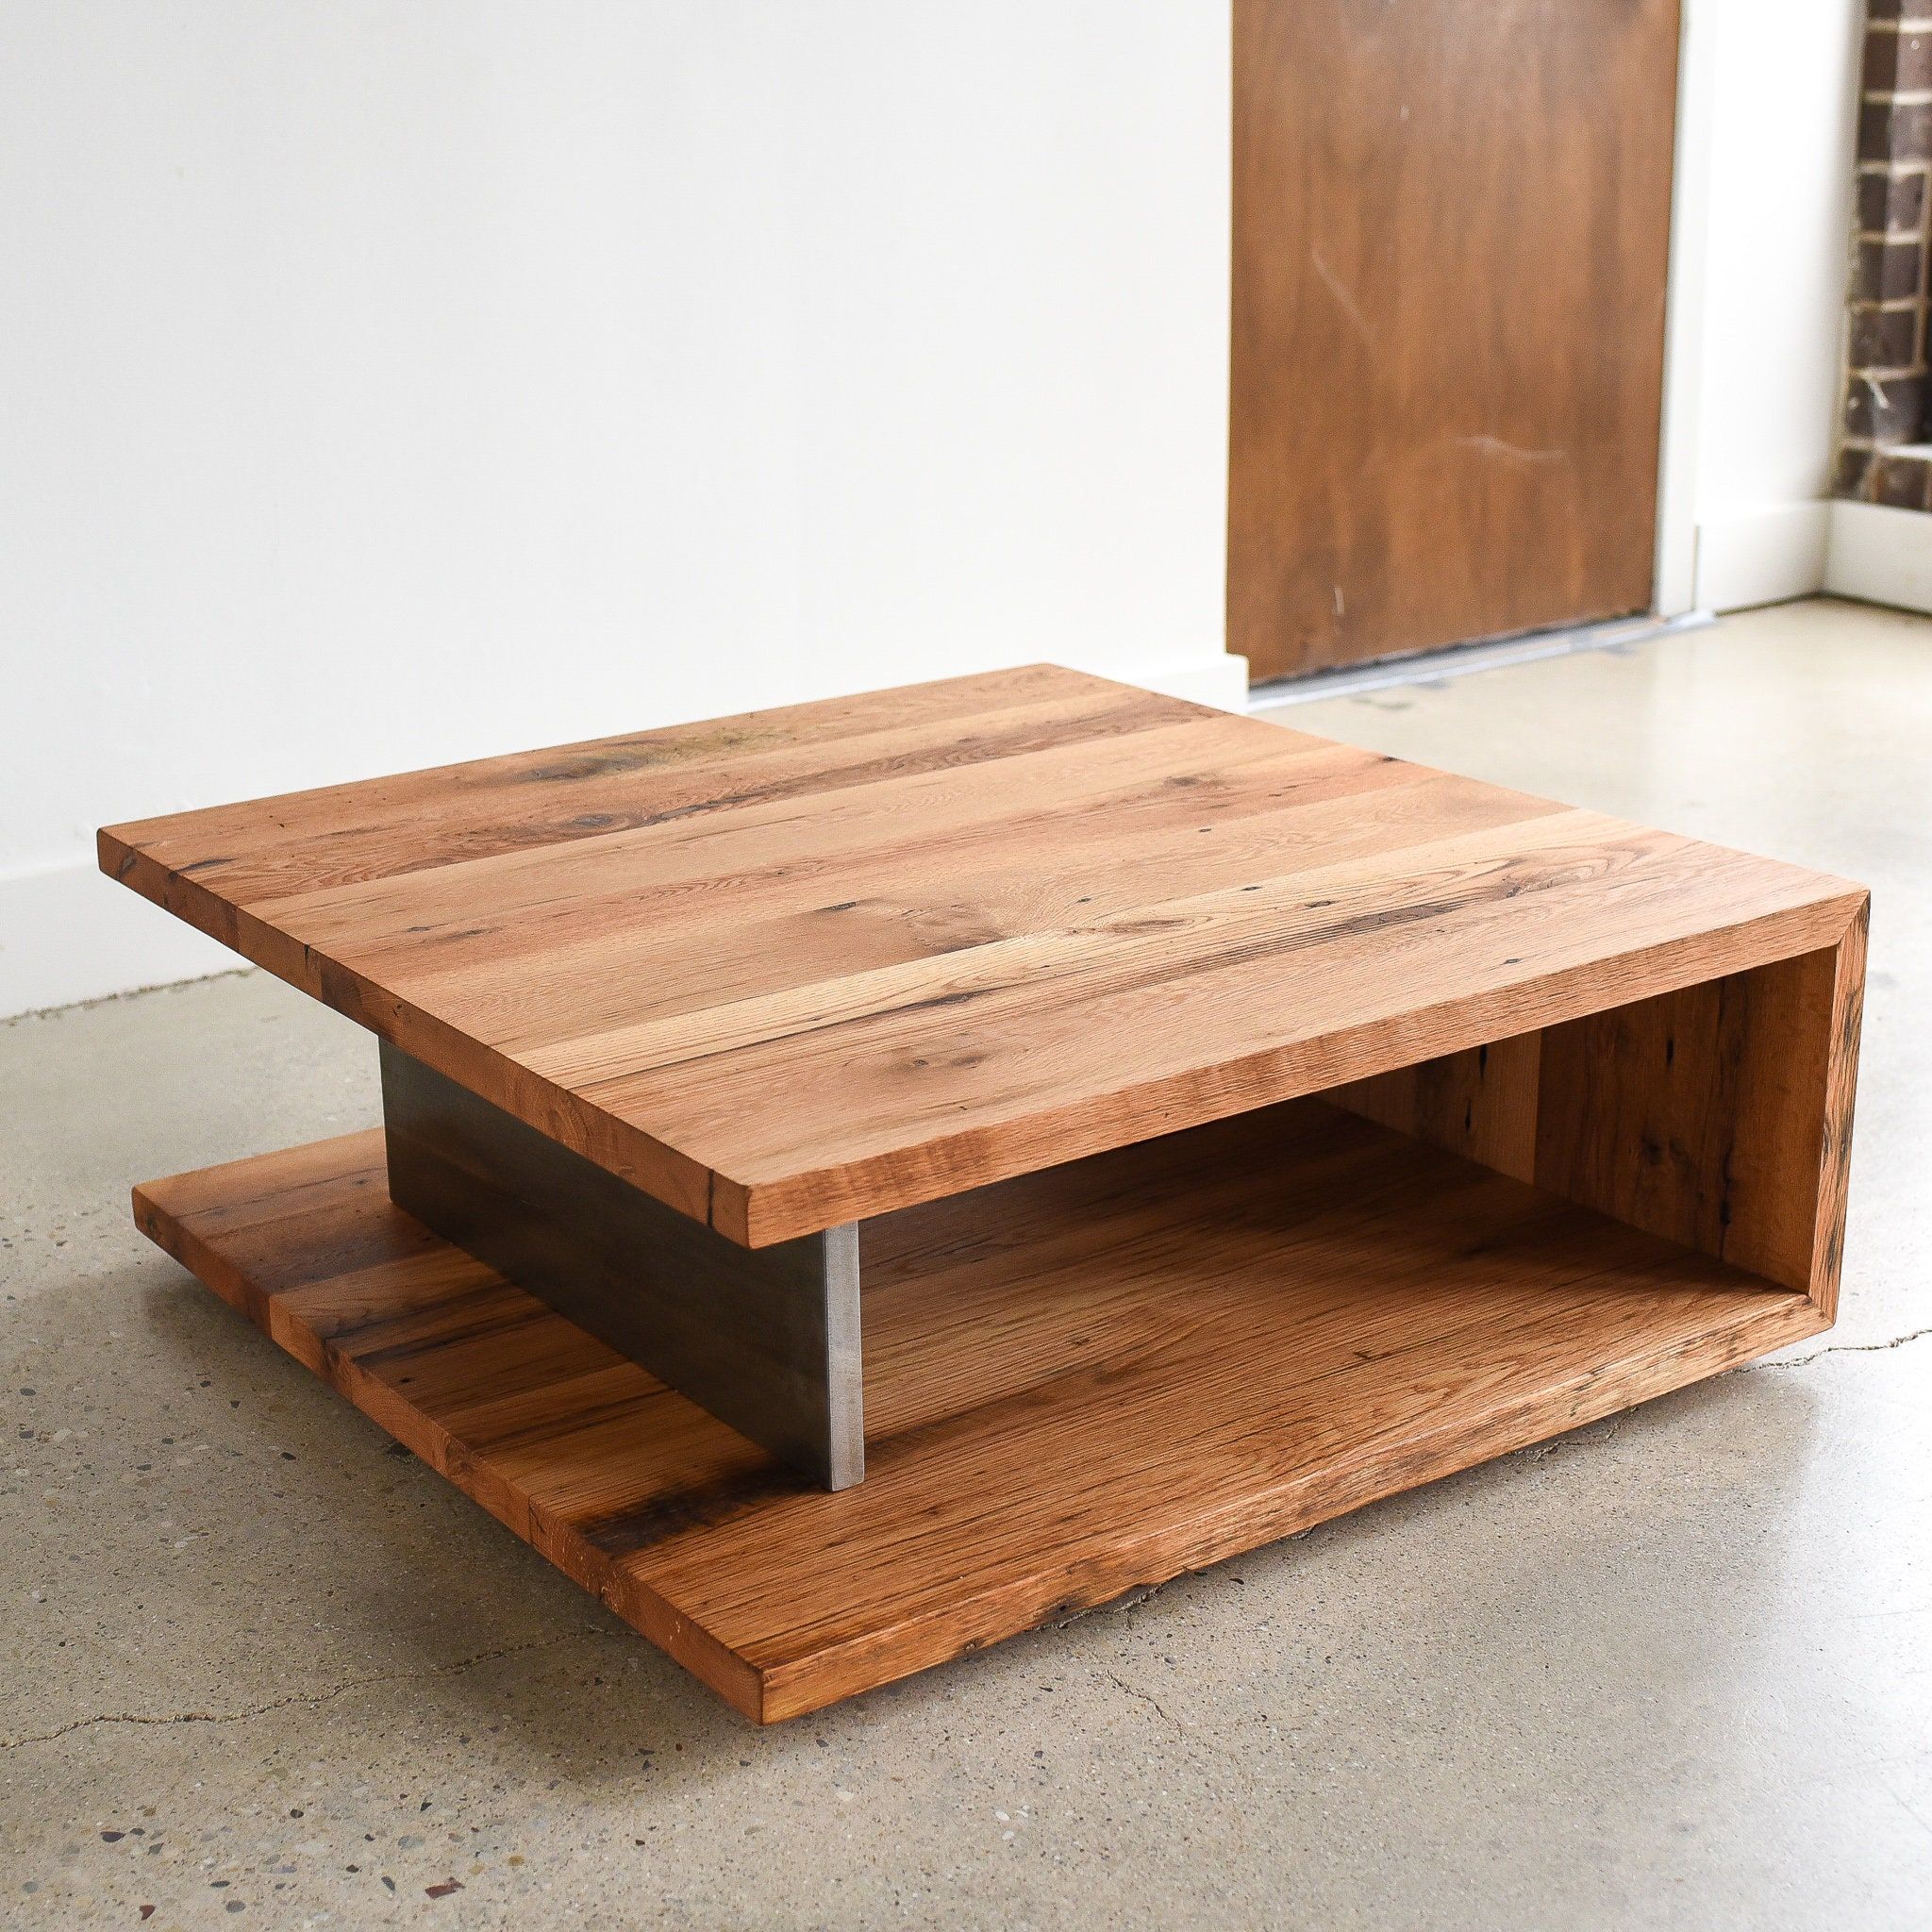 Modern Coffee Table / Square Open Shelf Coffee Table Made From – Etsy Intended For Open Shelf Coffee Tables (View 2 of 20)